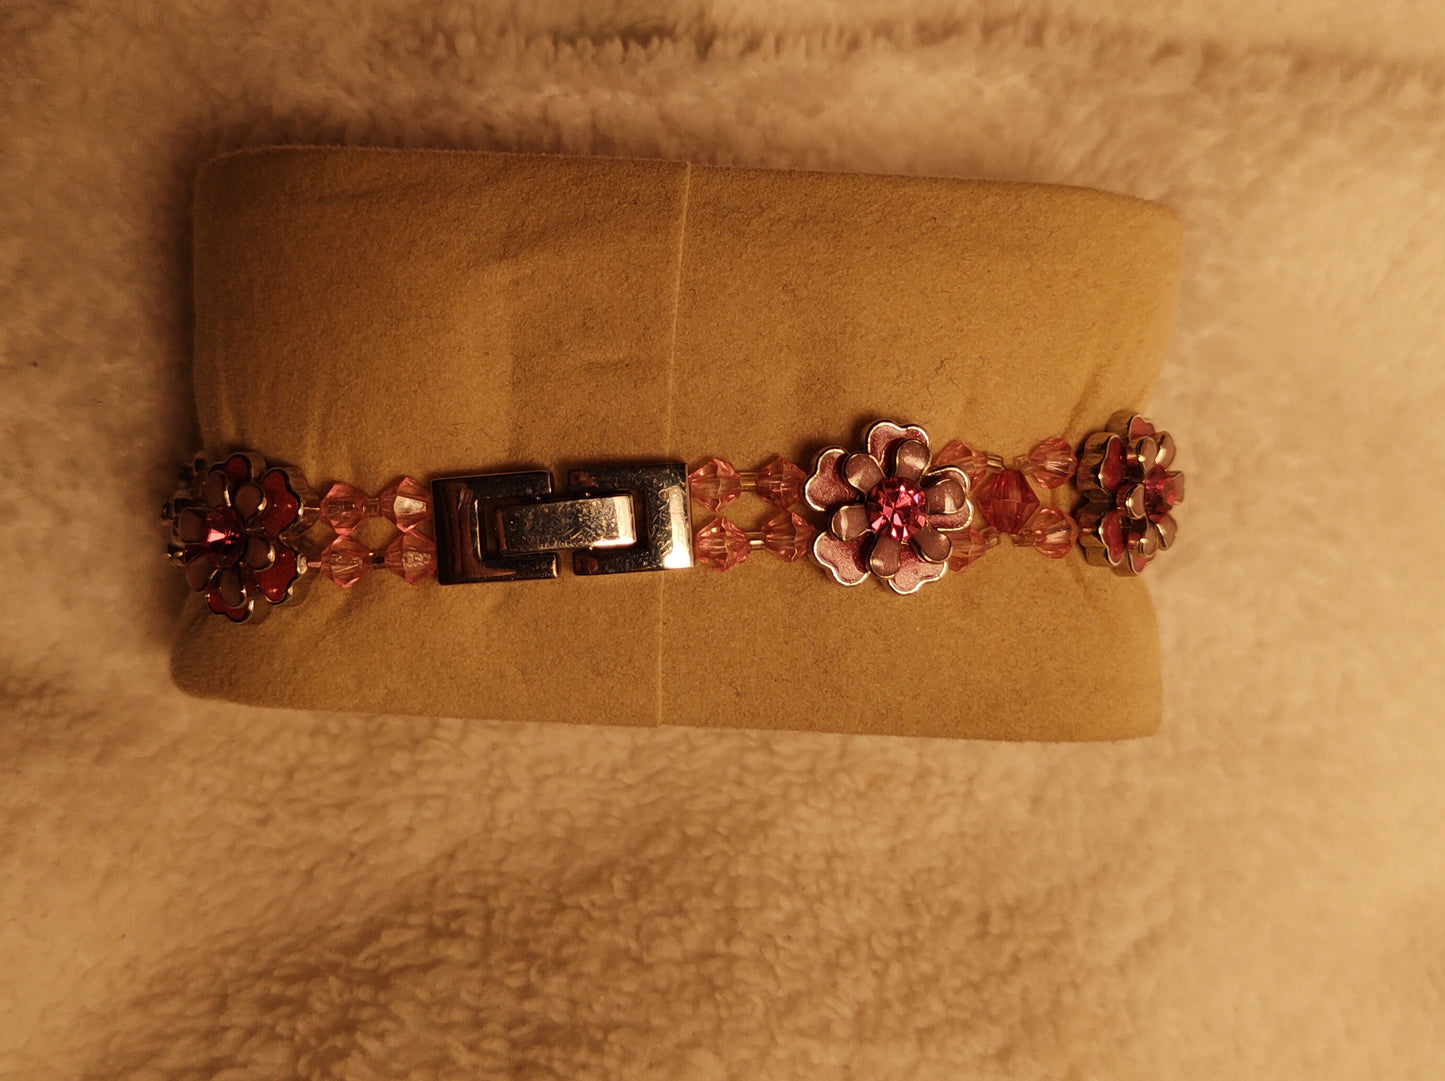 Simple brand pre-owned oval shaped watch surrounded by very nice imitation pink diamonds .. elastic band with flowers and a stainless clasp..light pink dial..Nice spring summer watch..